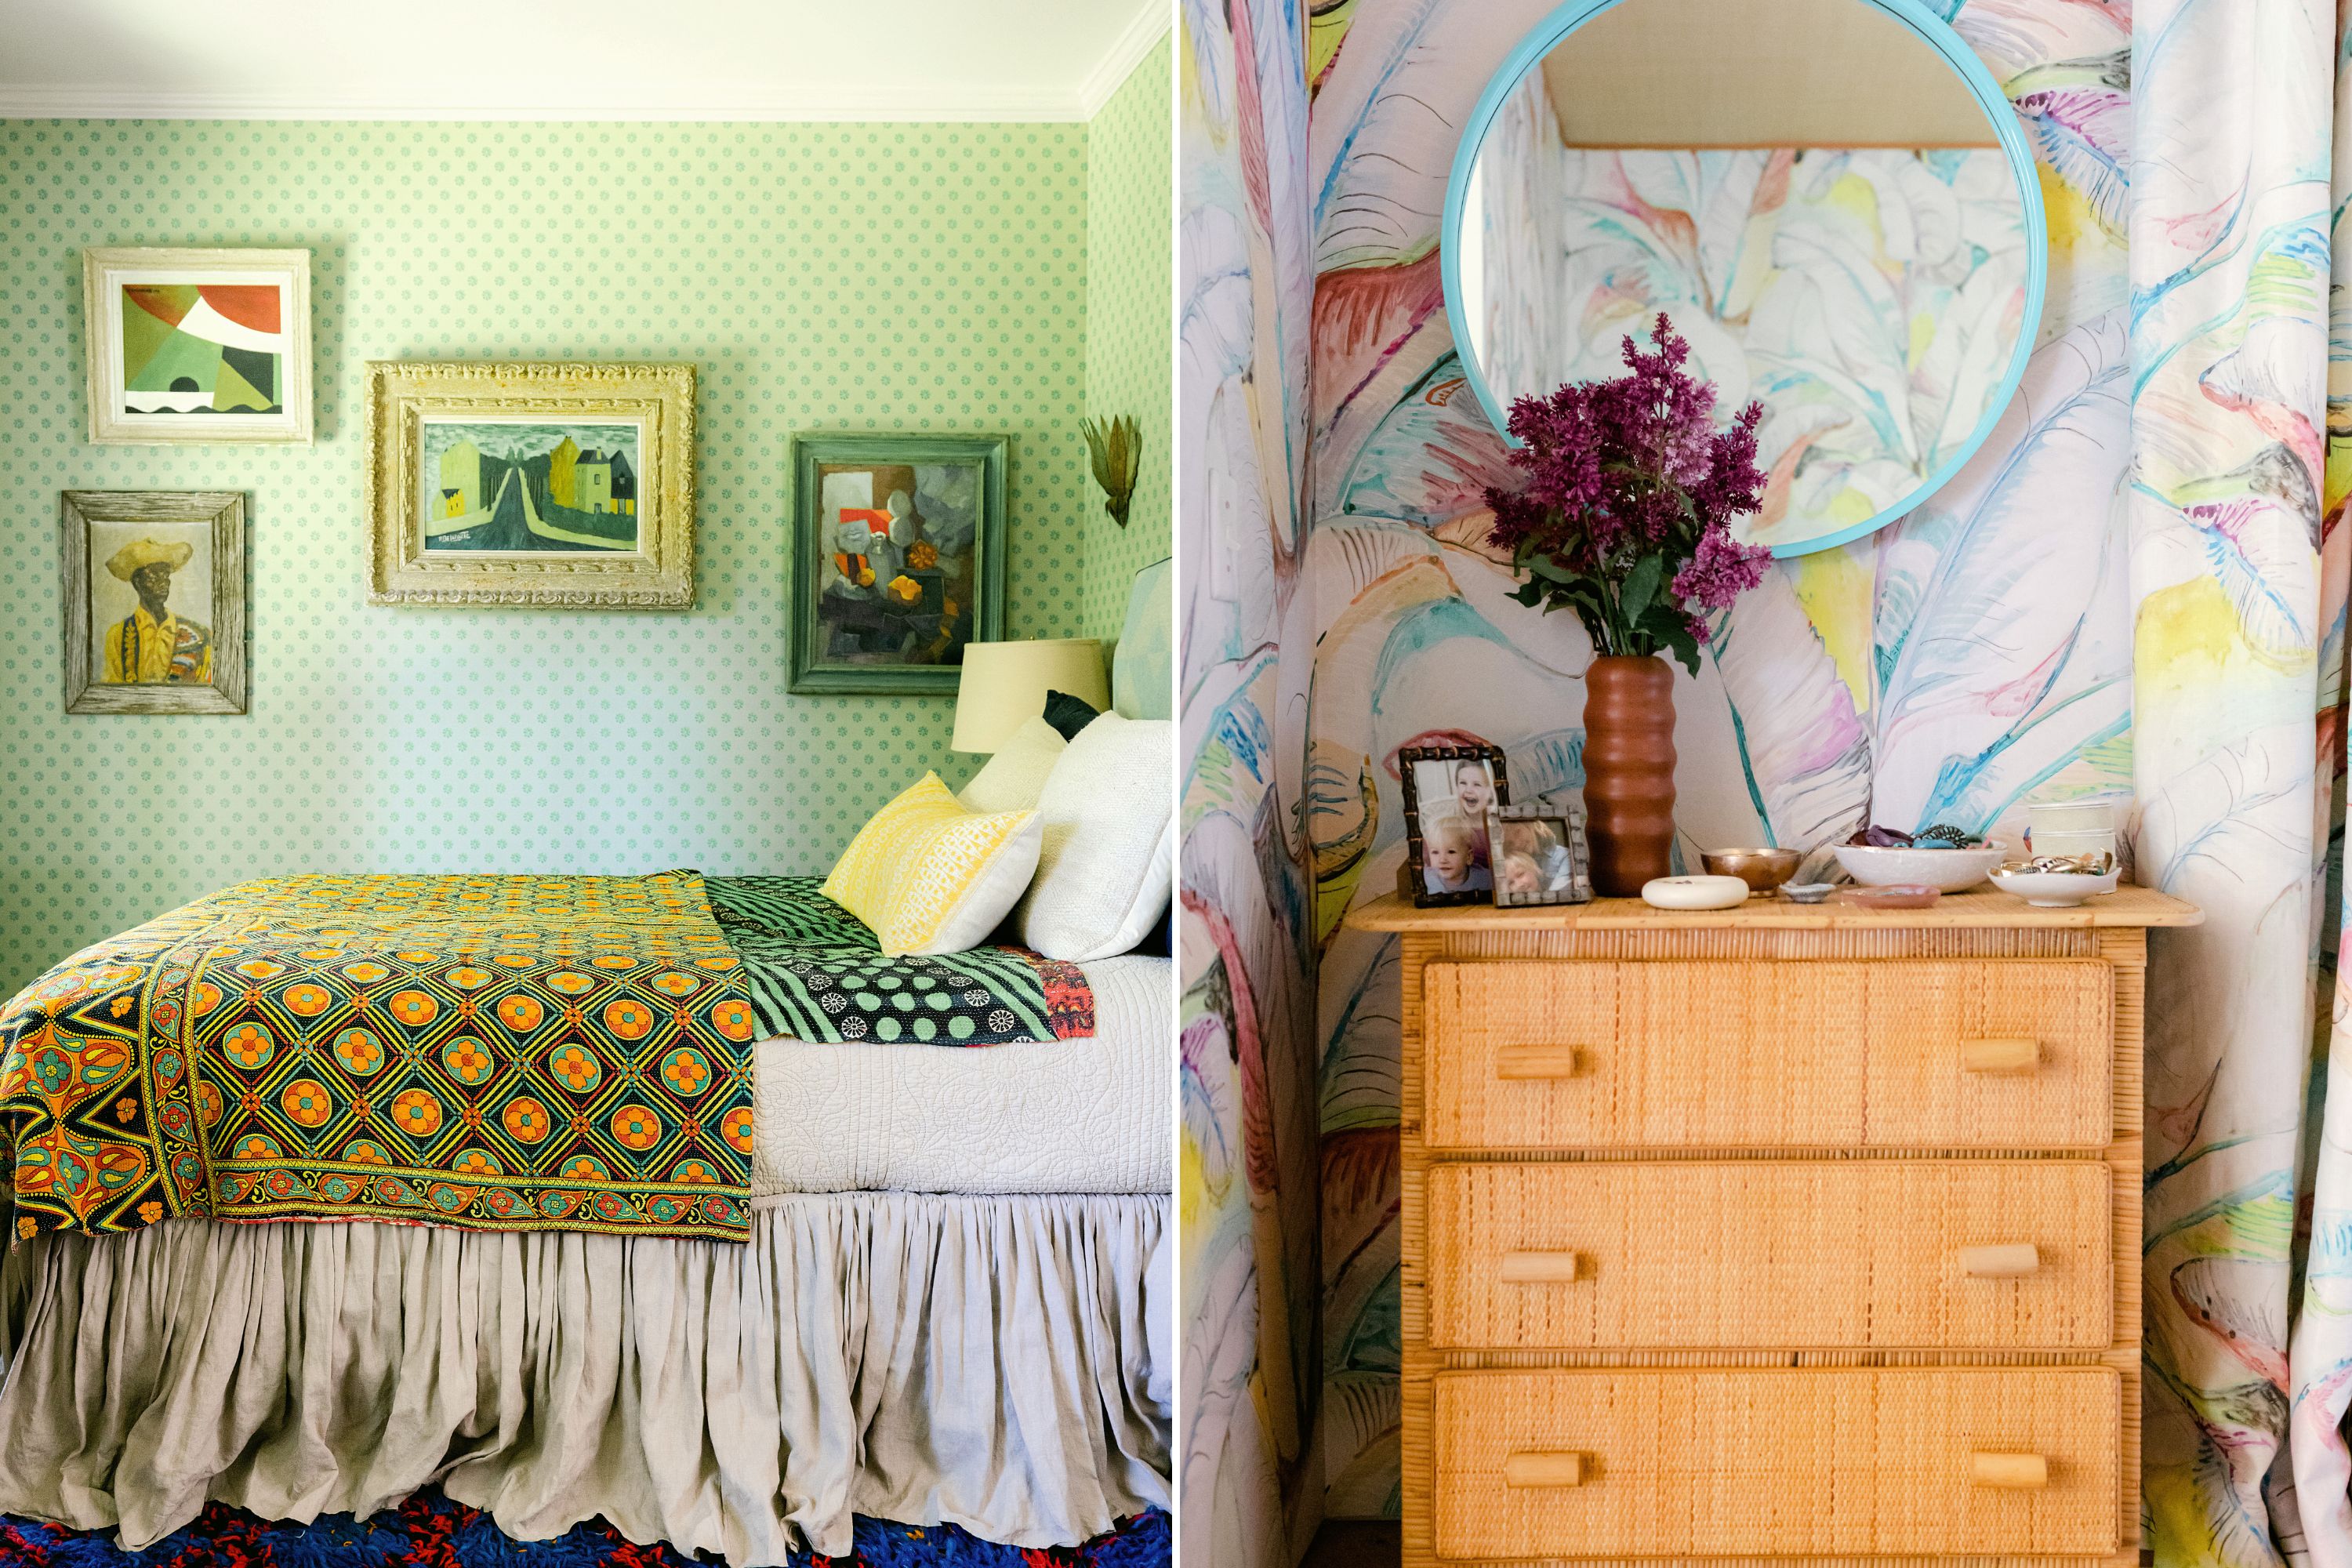 A collage of two images: a maximalist patterned bedroom with light green polka dot wallpaper and framed paintings; a dressing room nook with painterly wallpaper and a rattan dresser with photos and a vase of flowers.